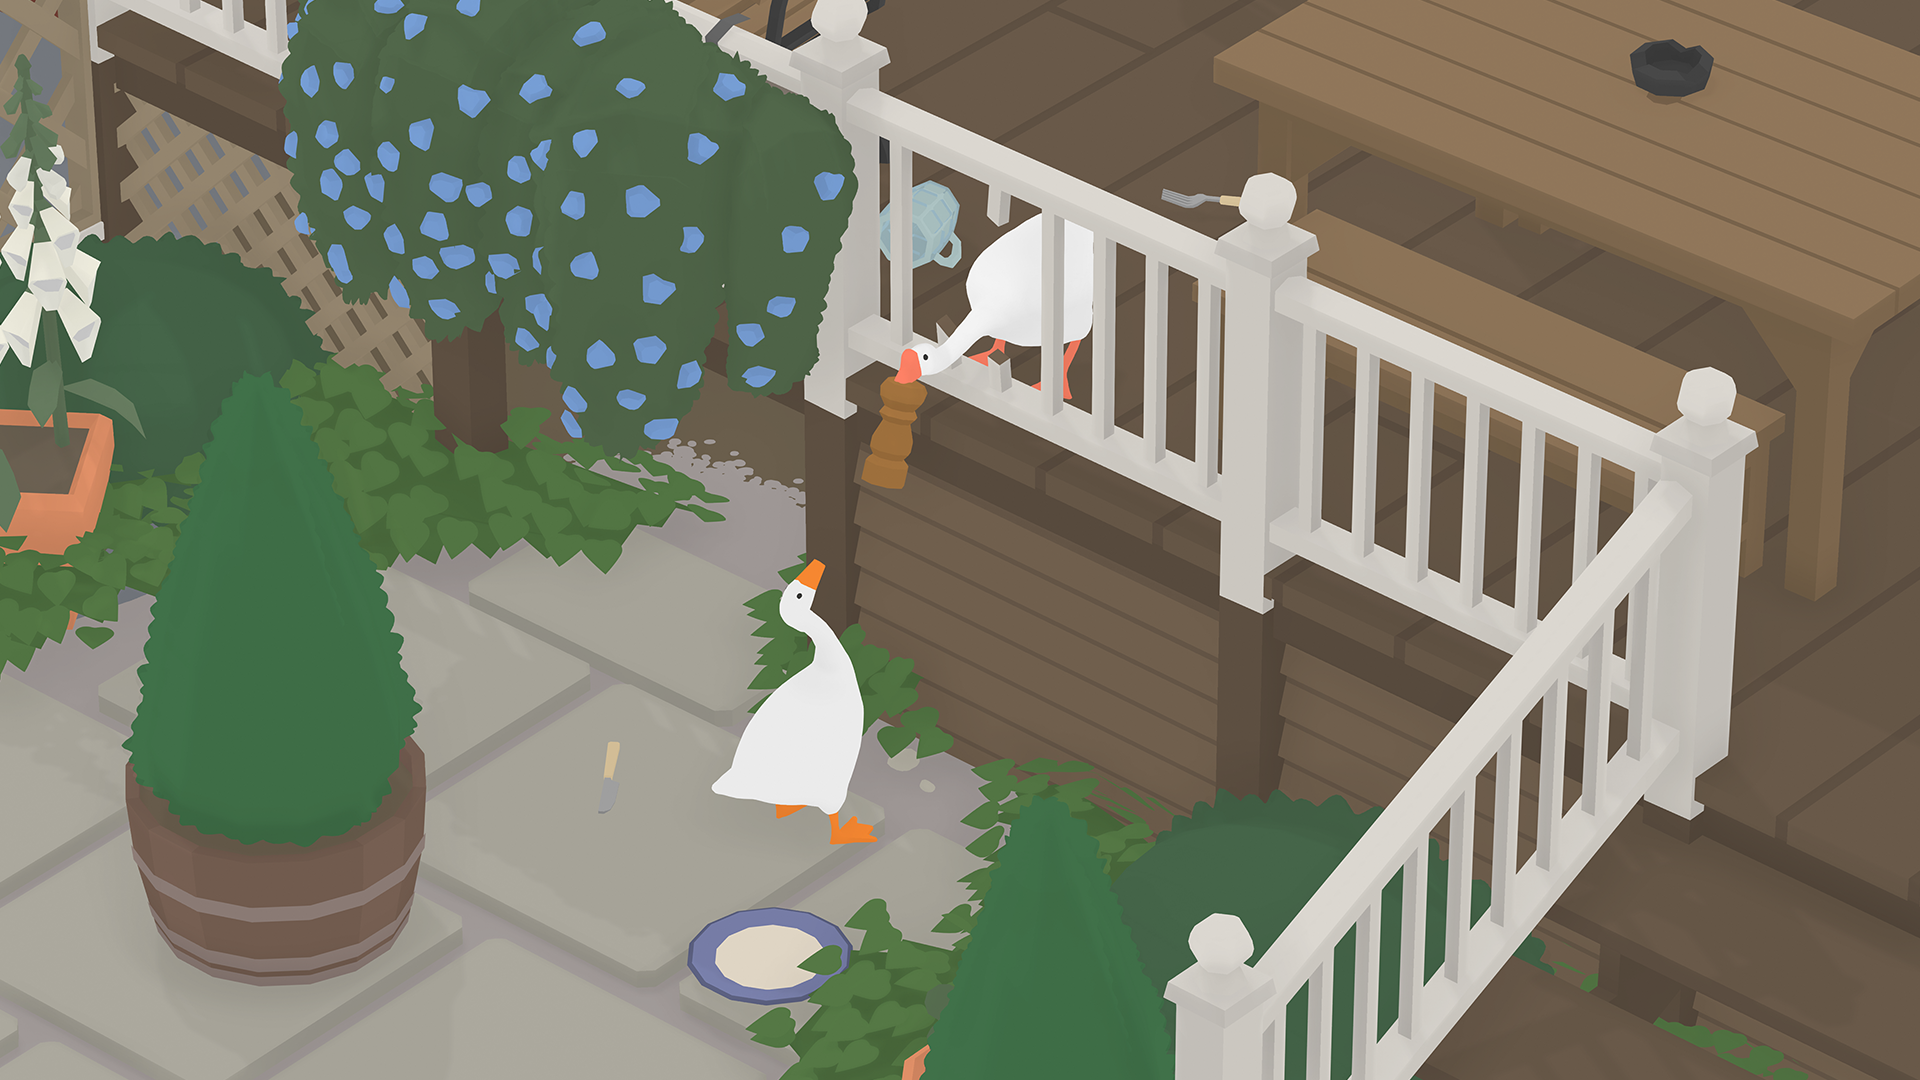 Untitled Goose Game heads to Steam with a co-op mode in September